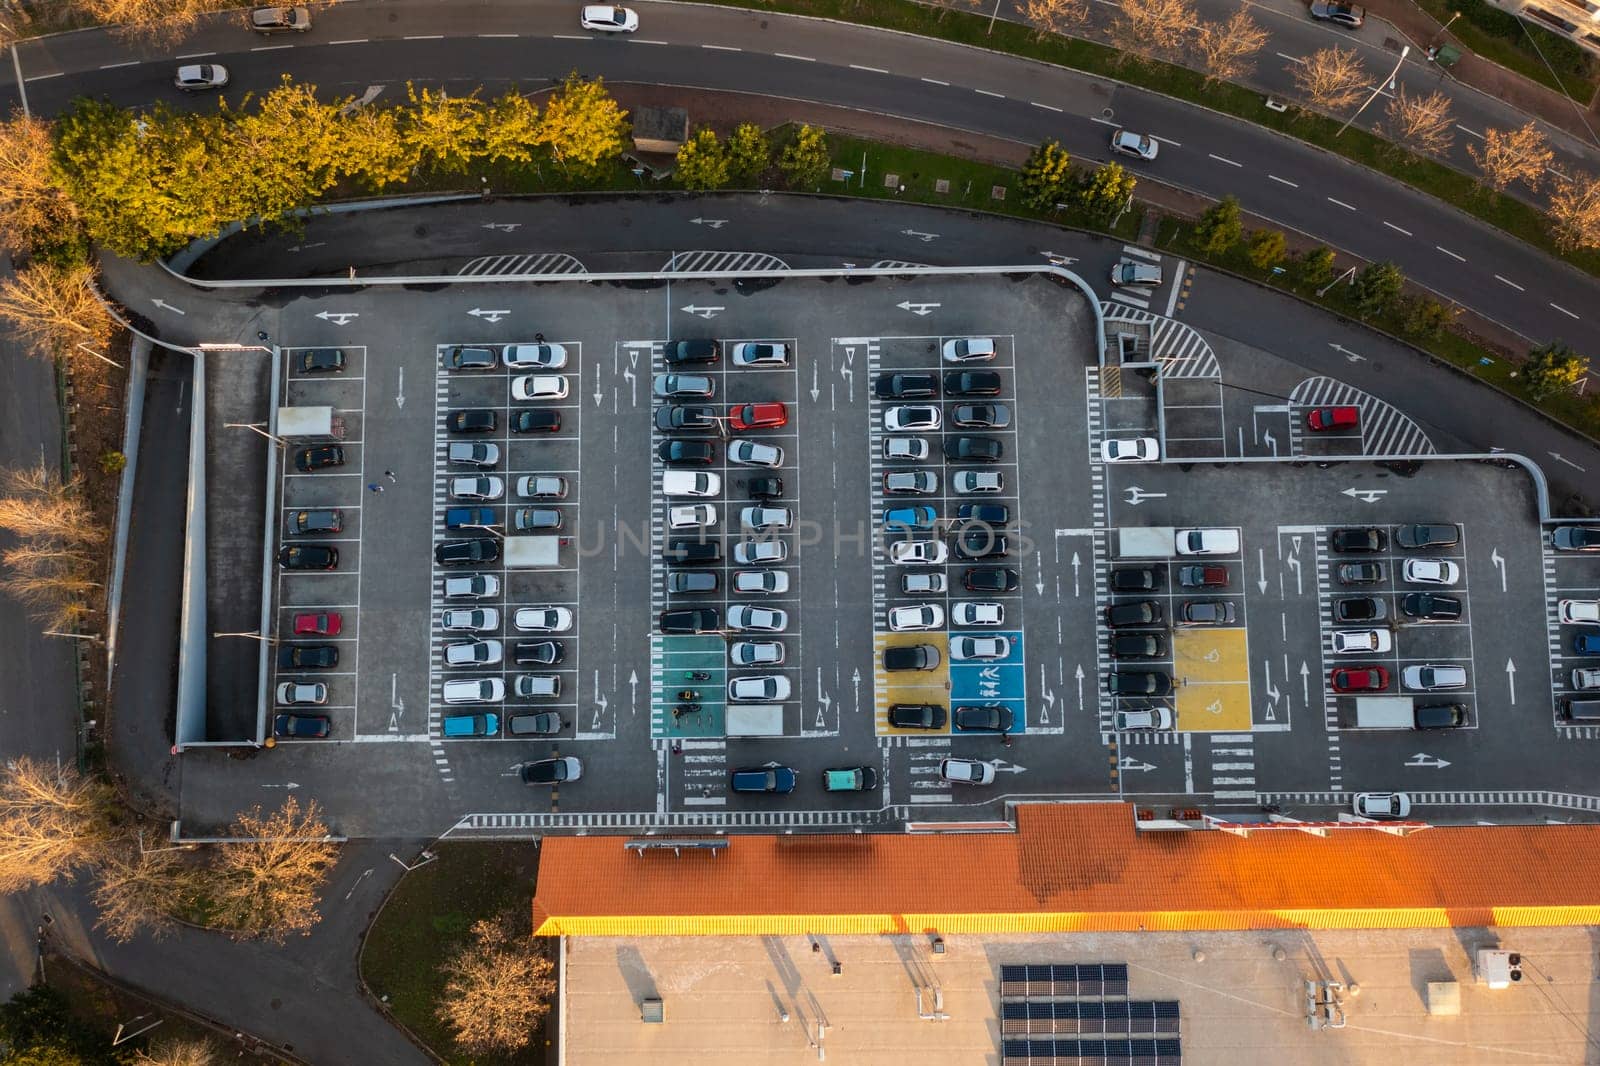 Aerial view of large parking lot in front shopping mall with many parked cars. Carpark at supermarket with lines and markings for vehicle places and directions